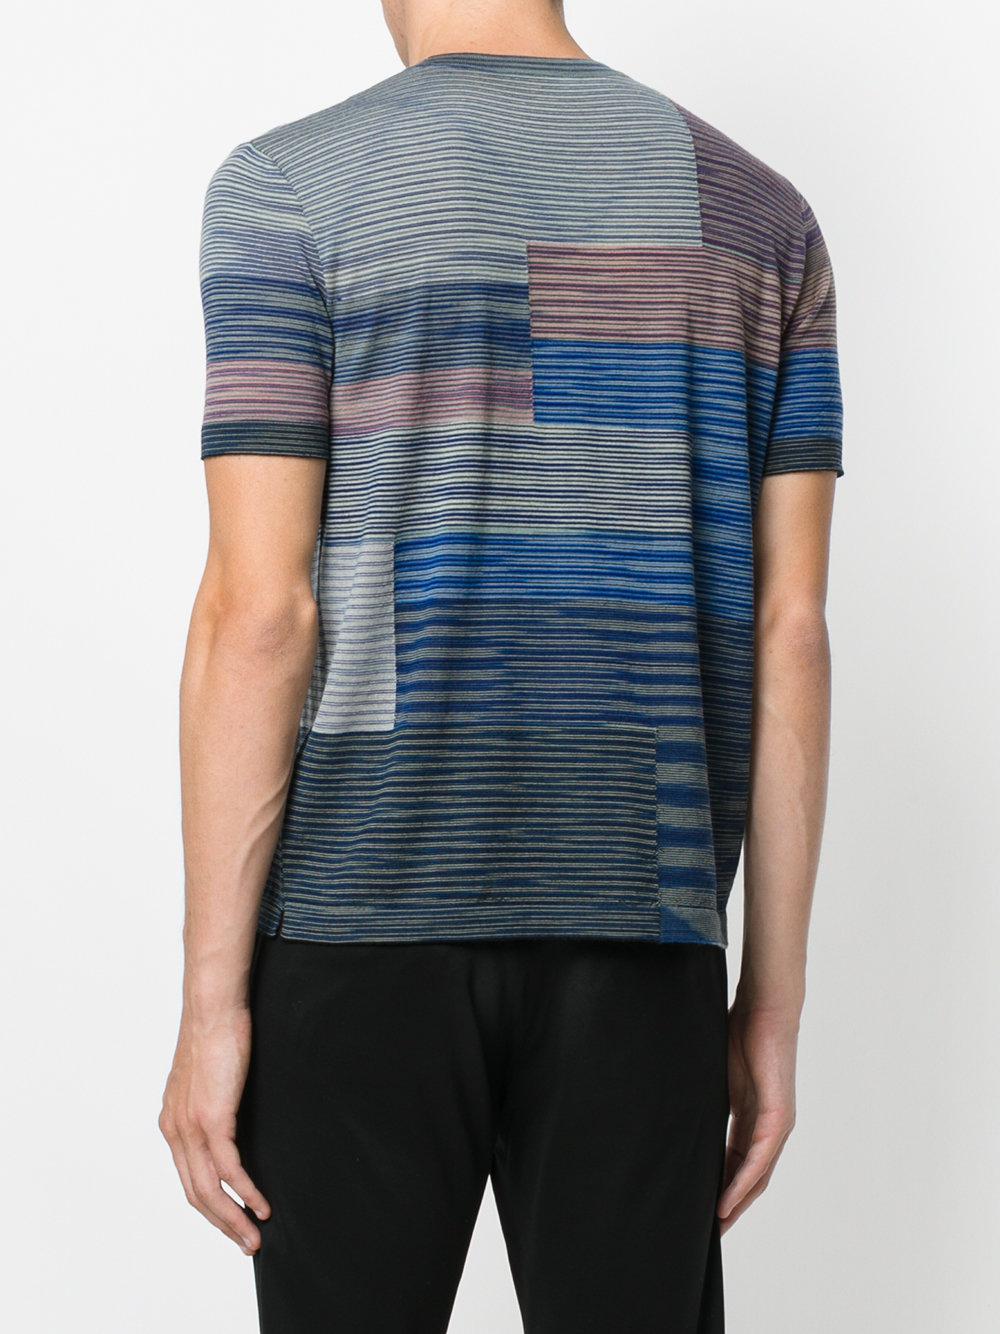 Missoni Wool Knitted T-shirt in Blue for Men - Lyst